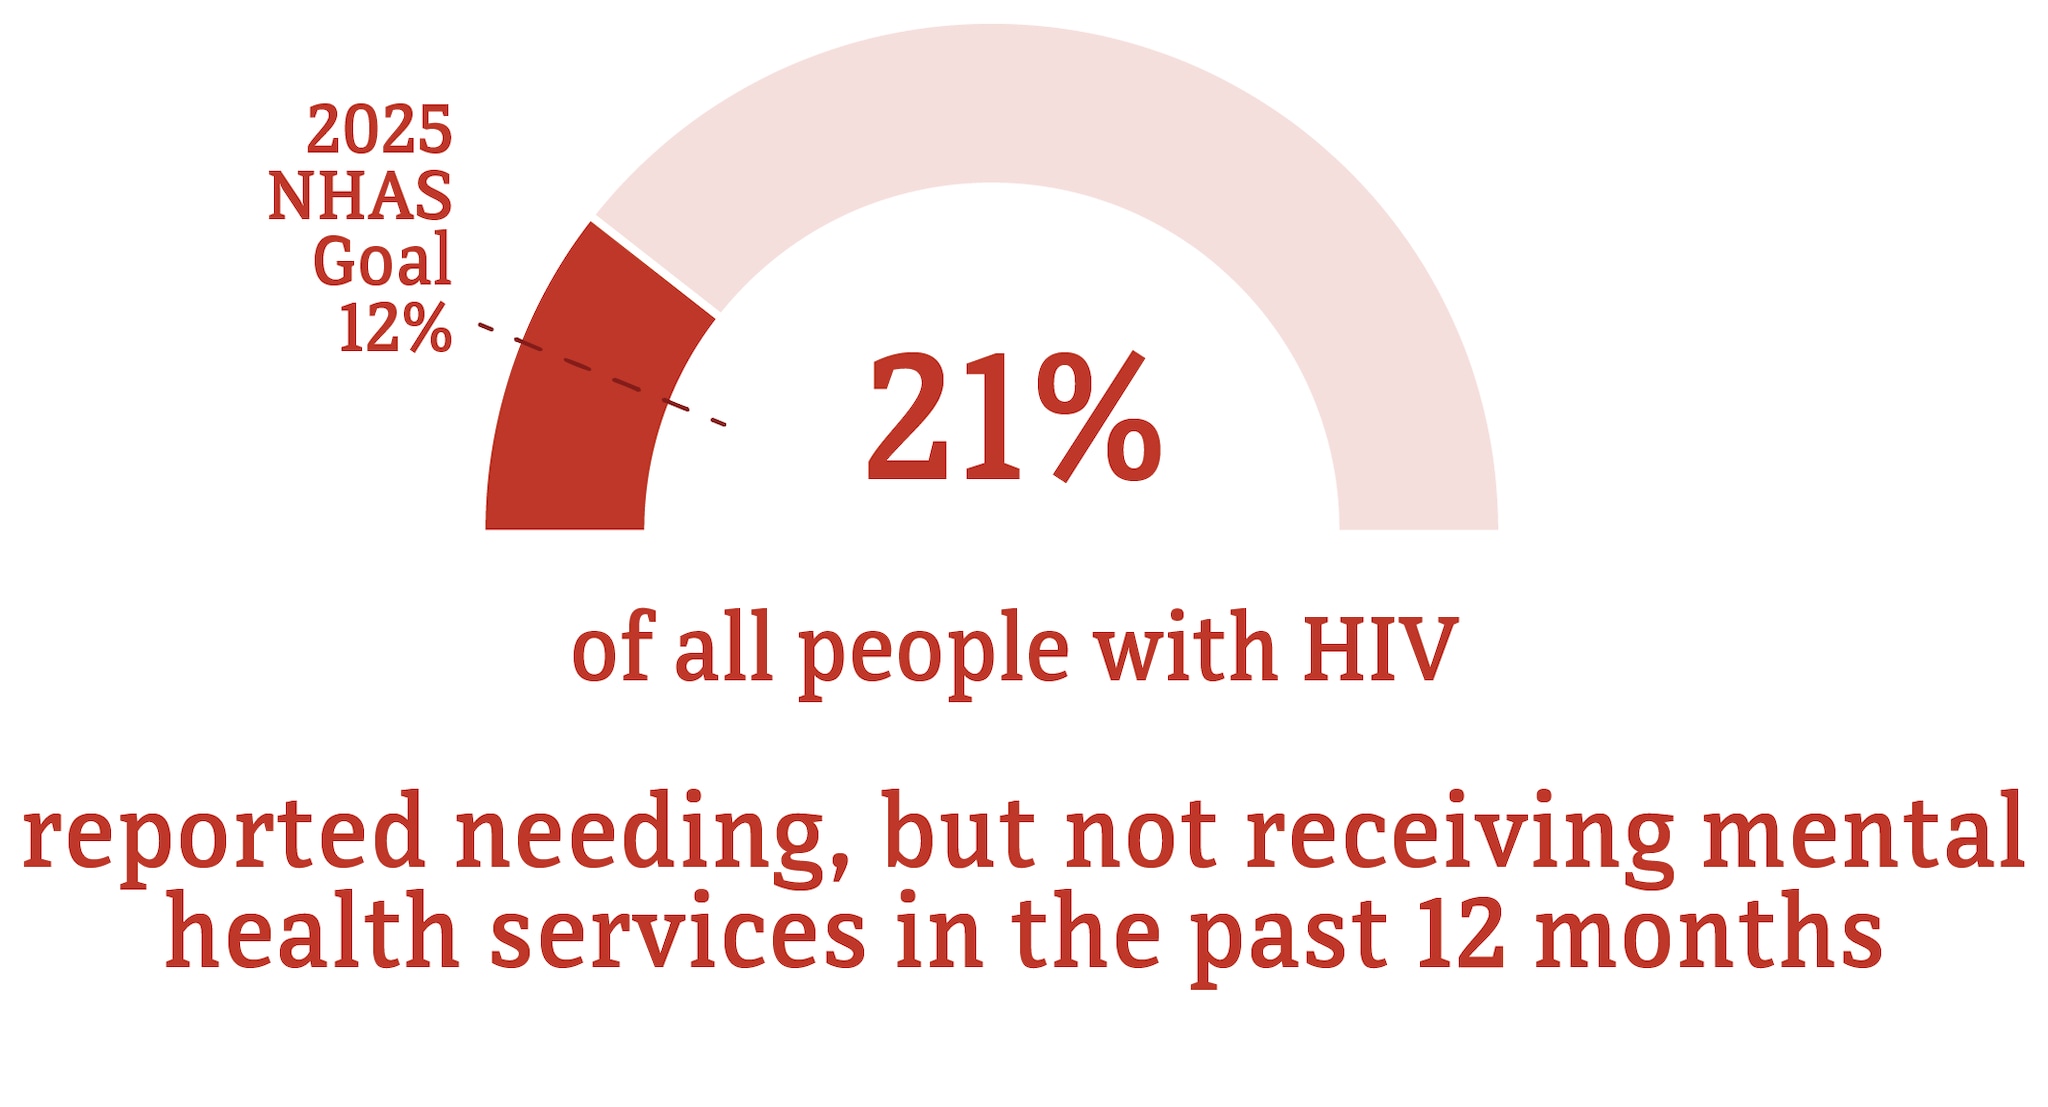 This chart shows the percentage of people with HIV who reported needing, but not receiving mental health services.